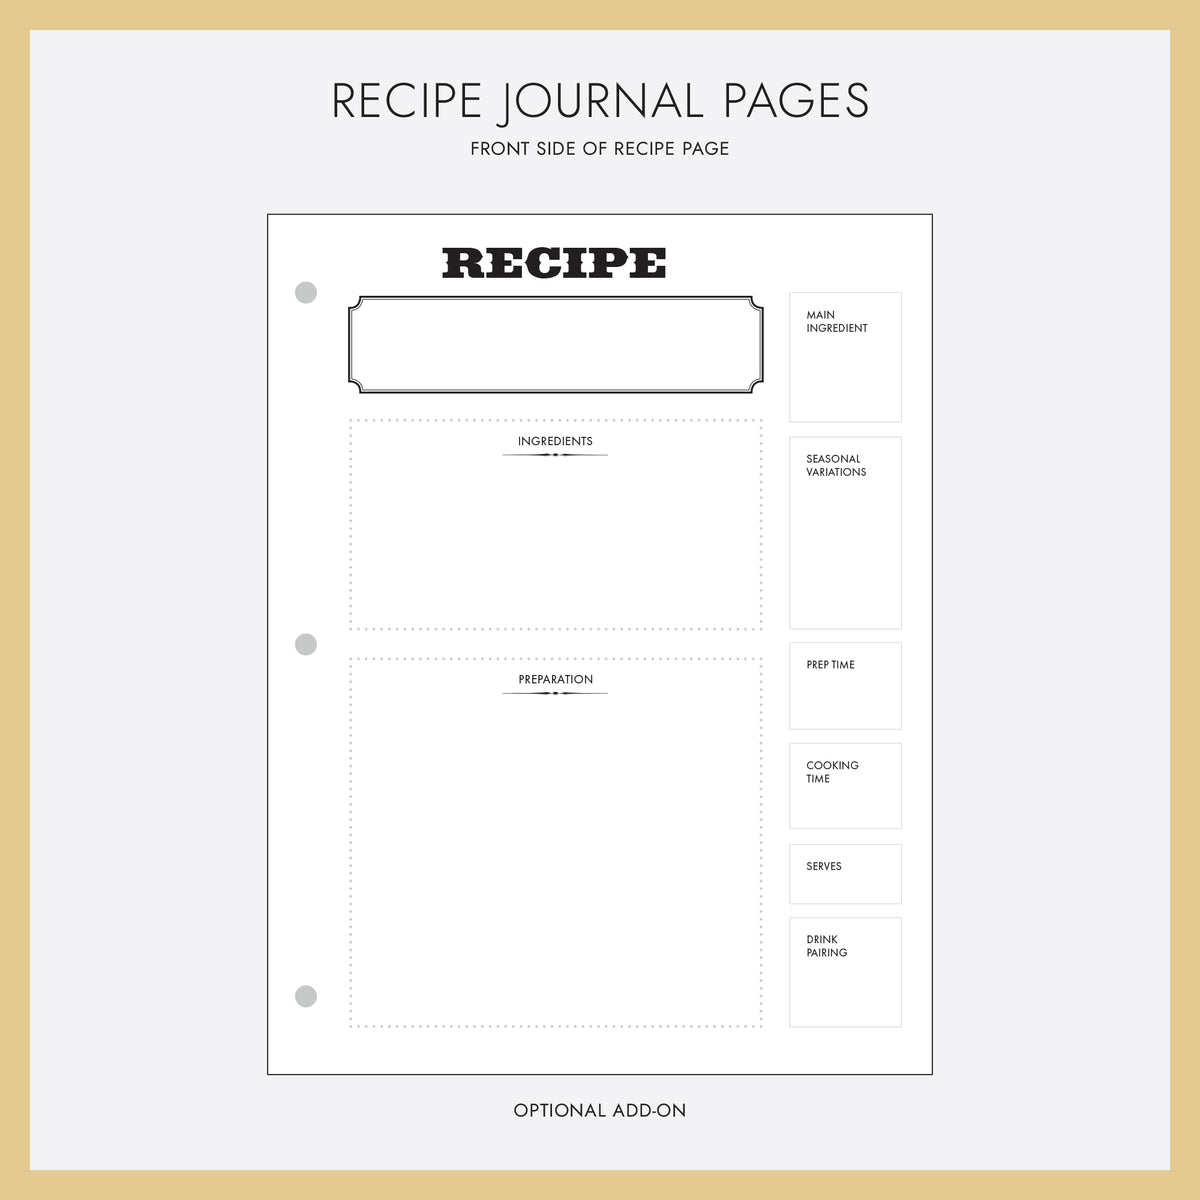 Recipe Journal Embossed with &quot;RECIPES&quot; covered with Natural Linen